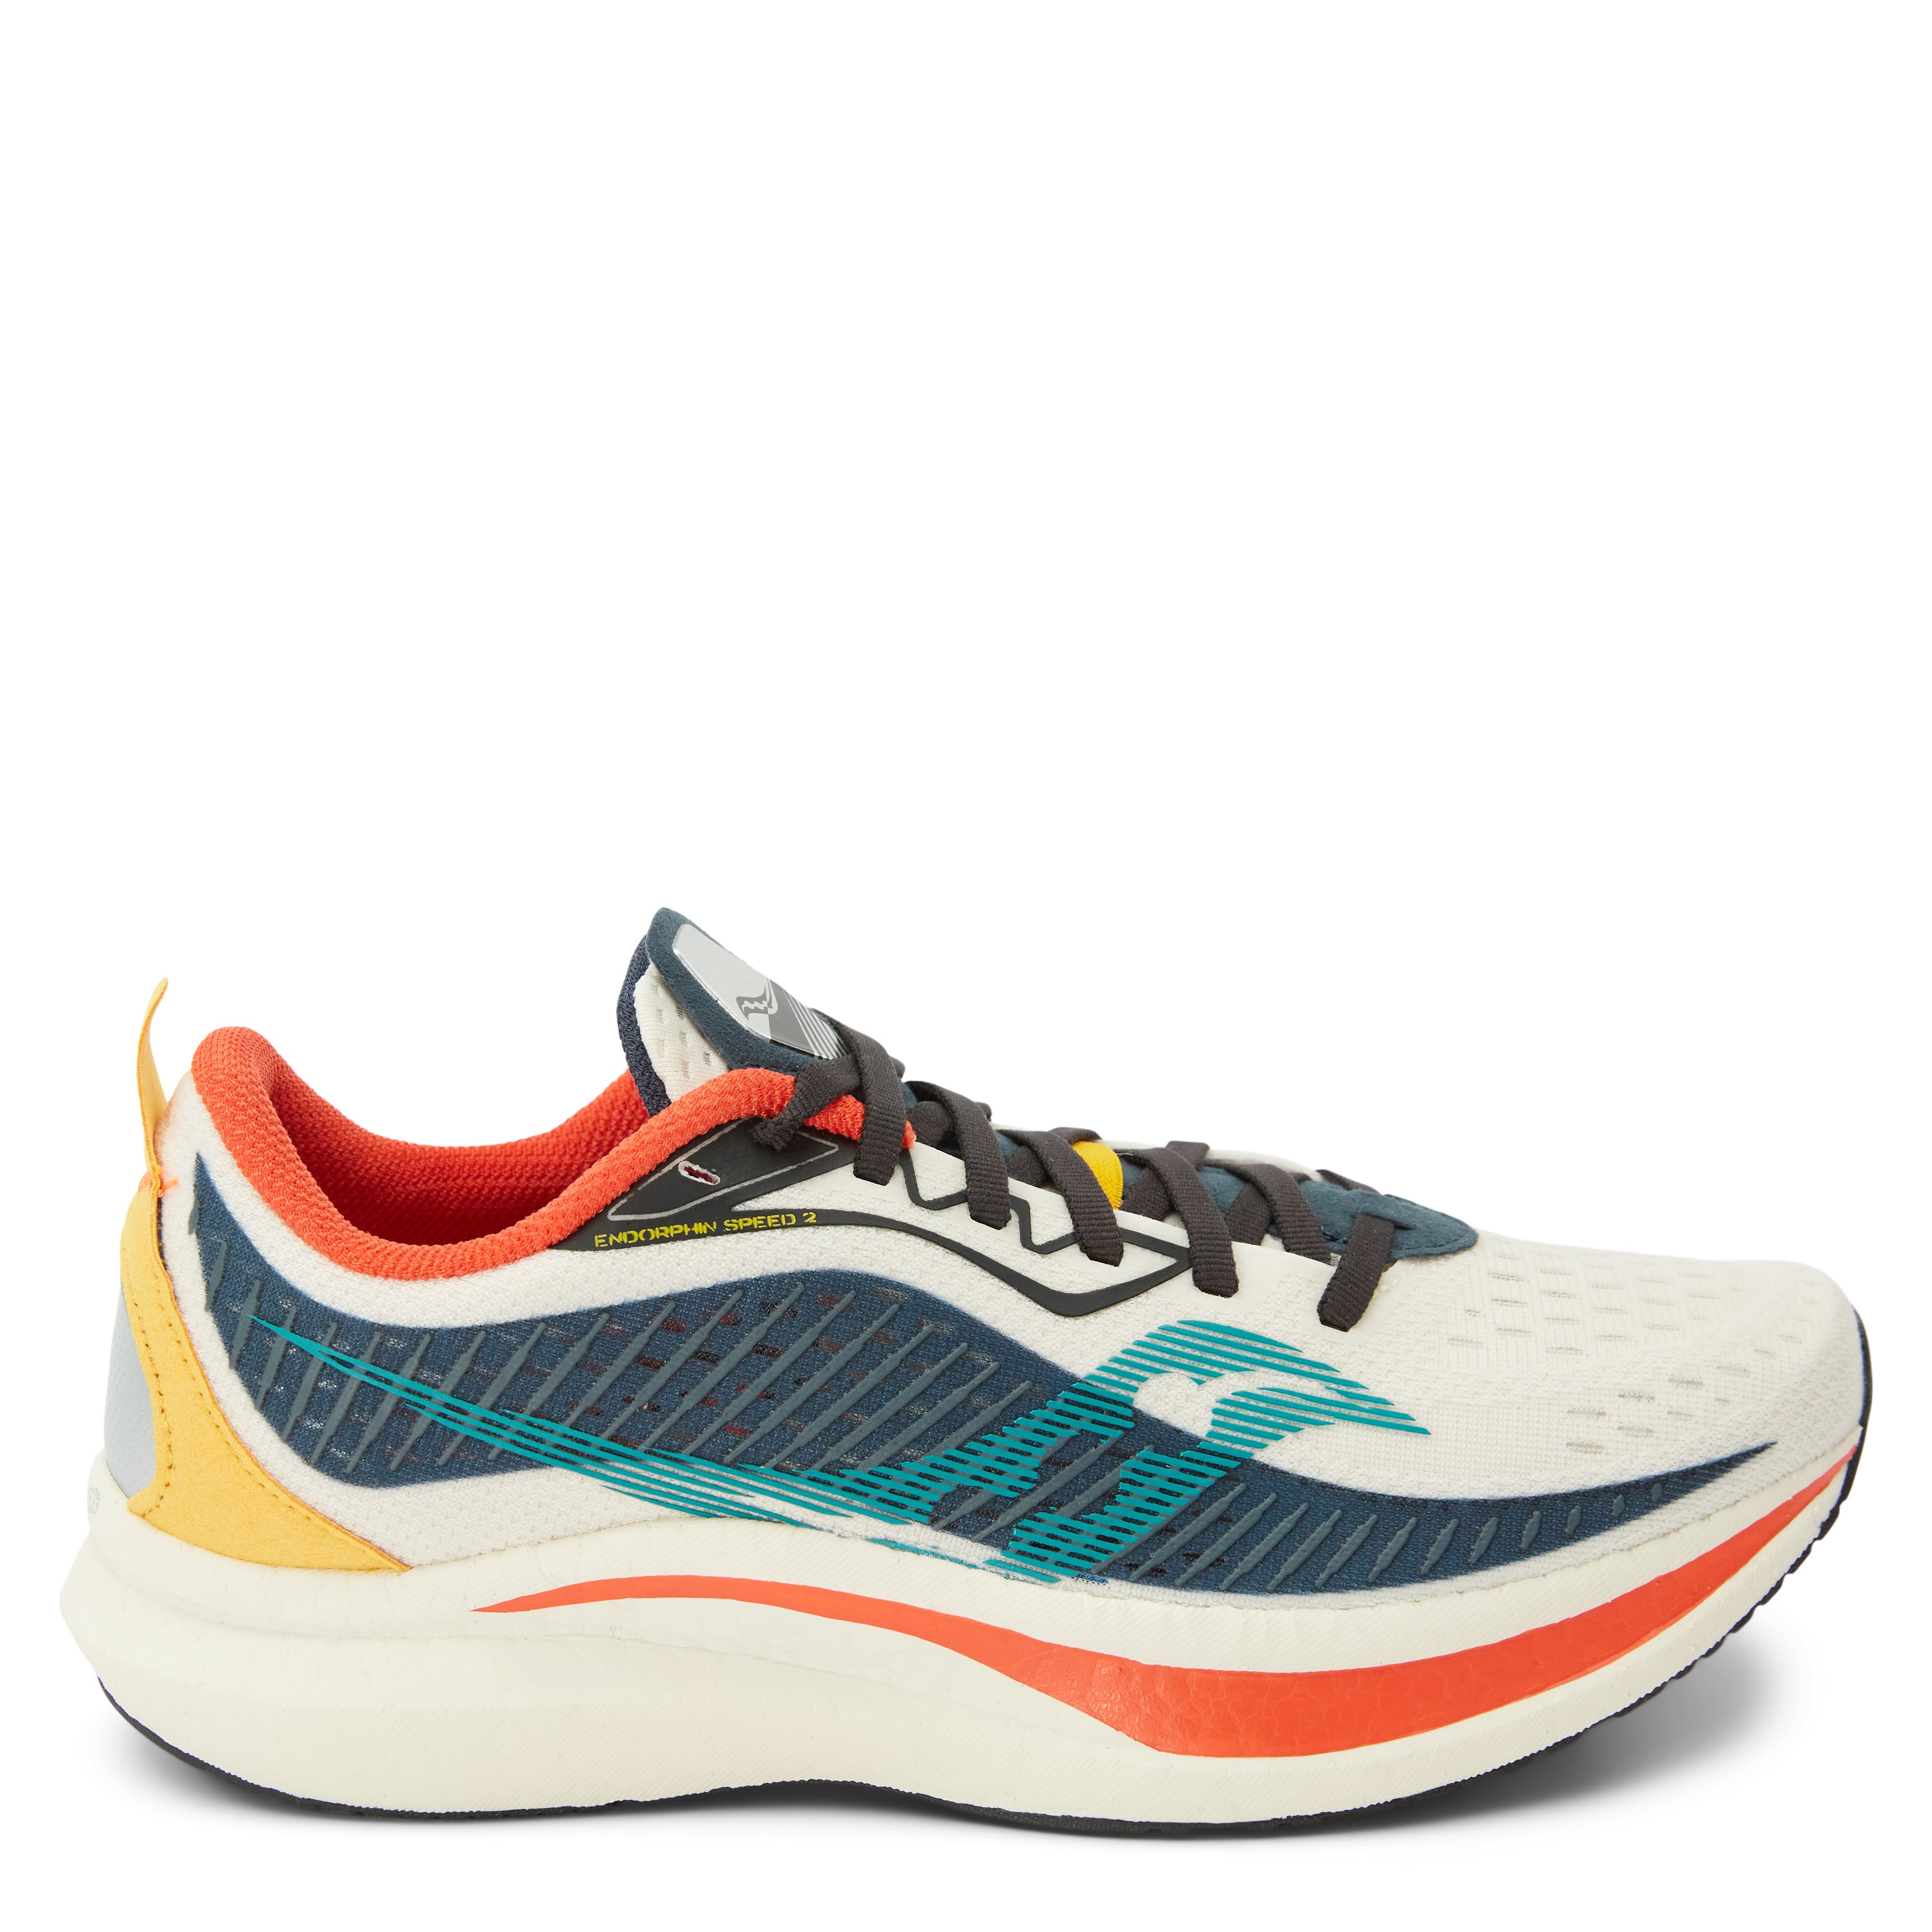 Saucony Shoes ENDORPHIN SPEED 20688-50 Multi